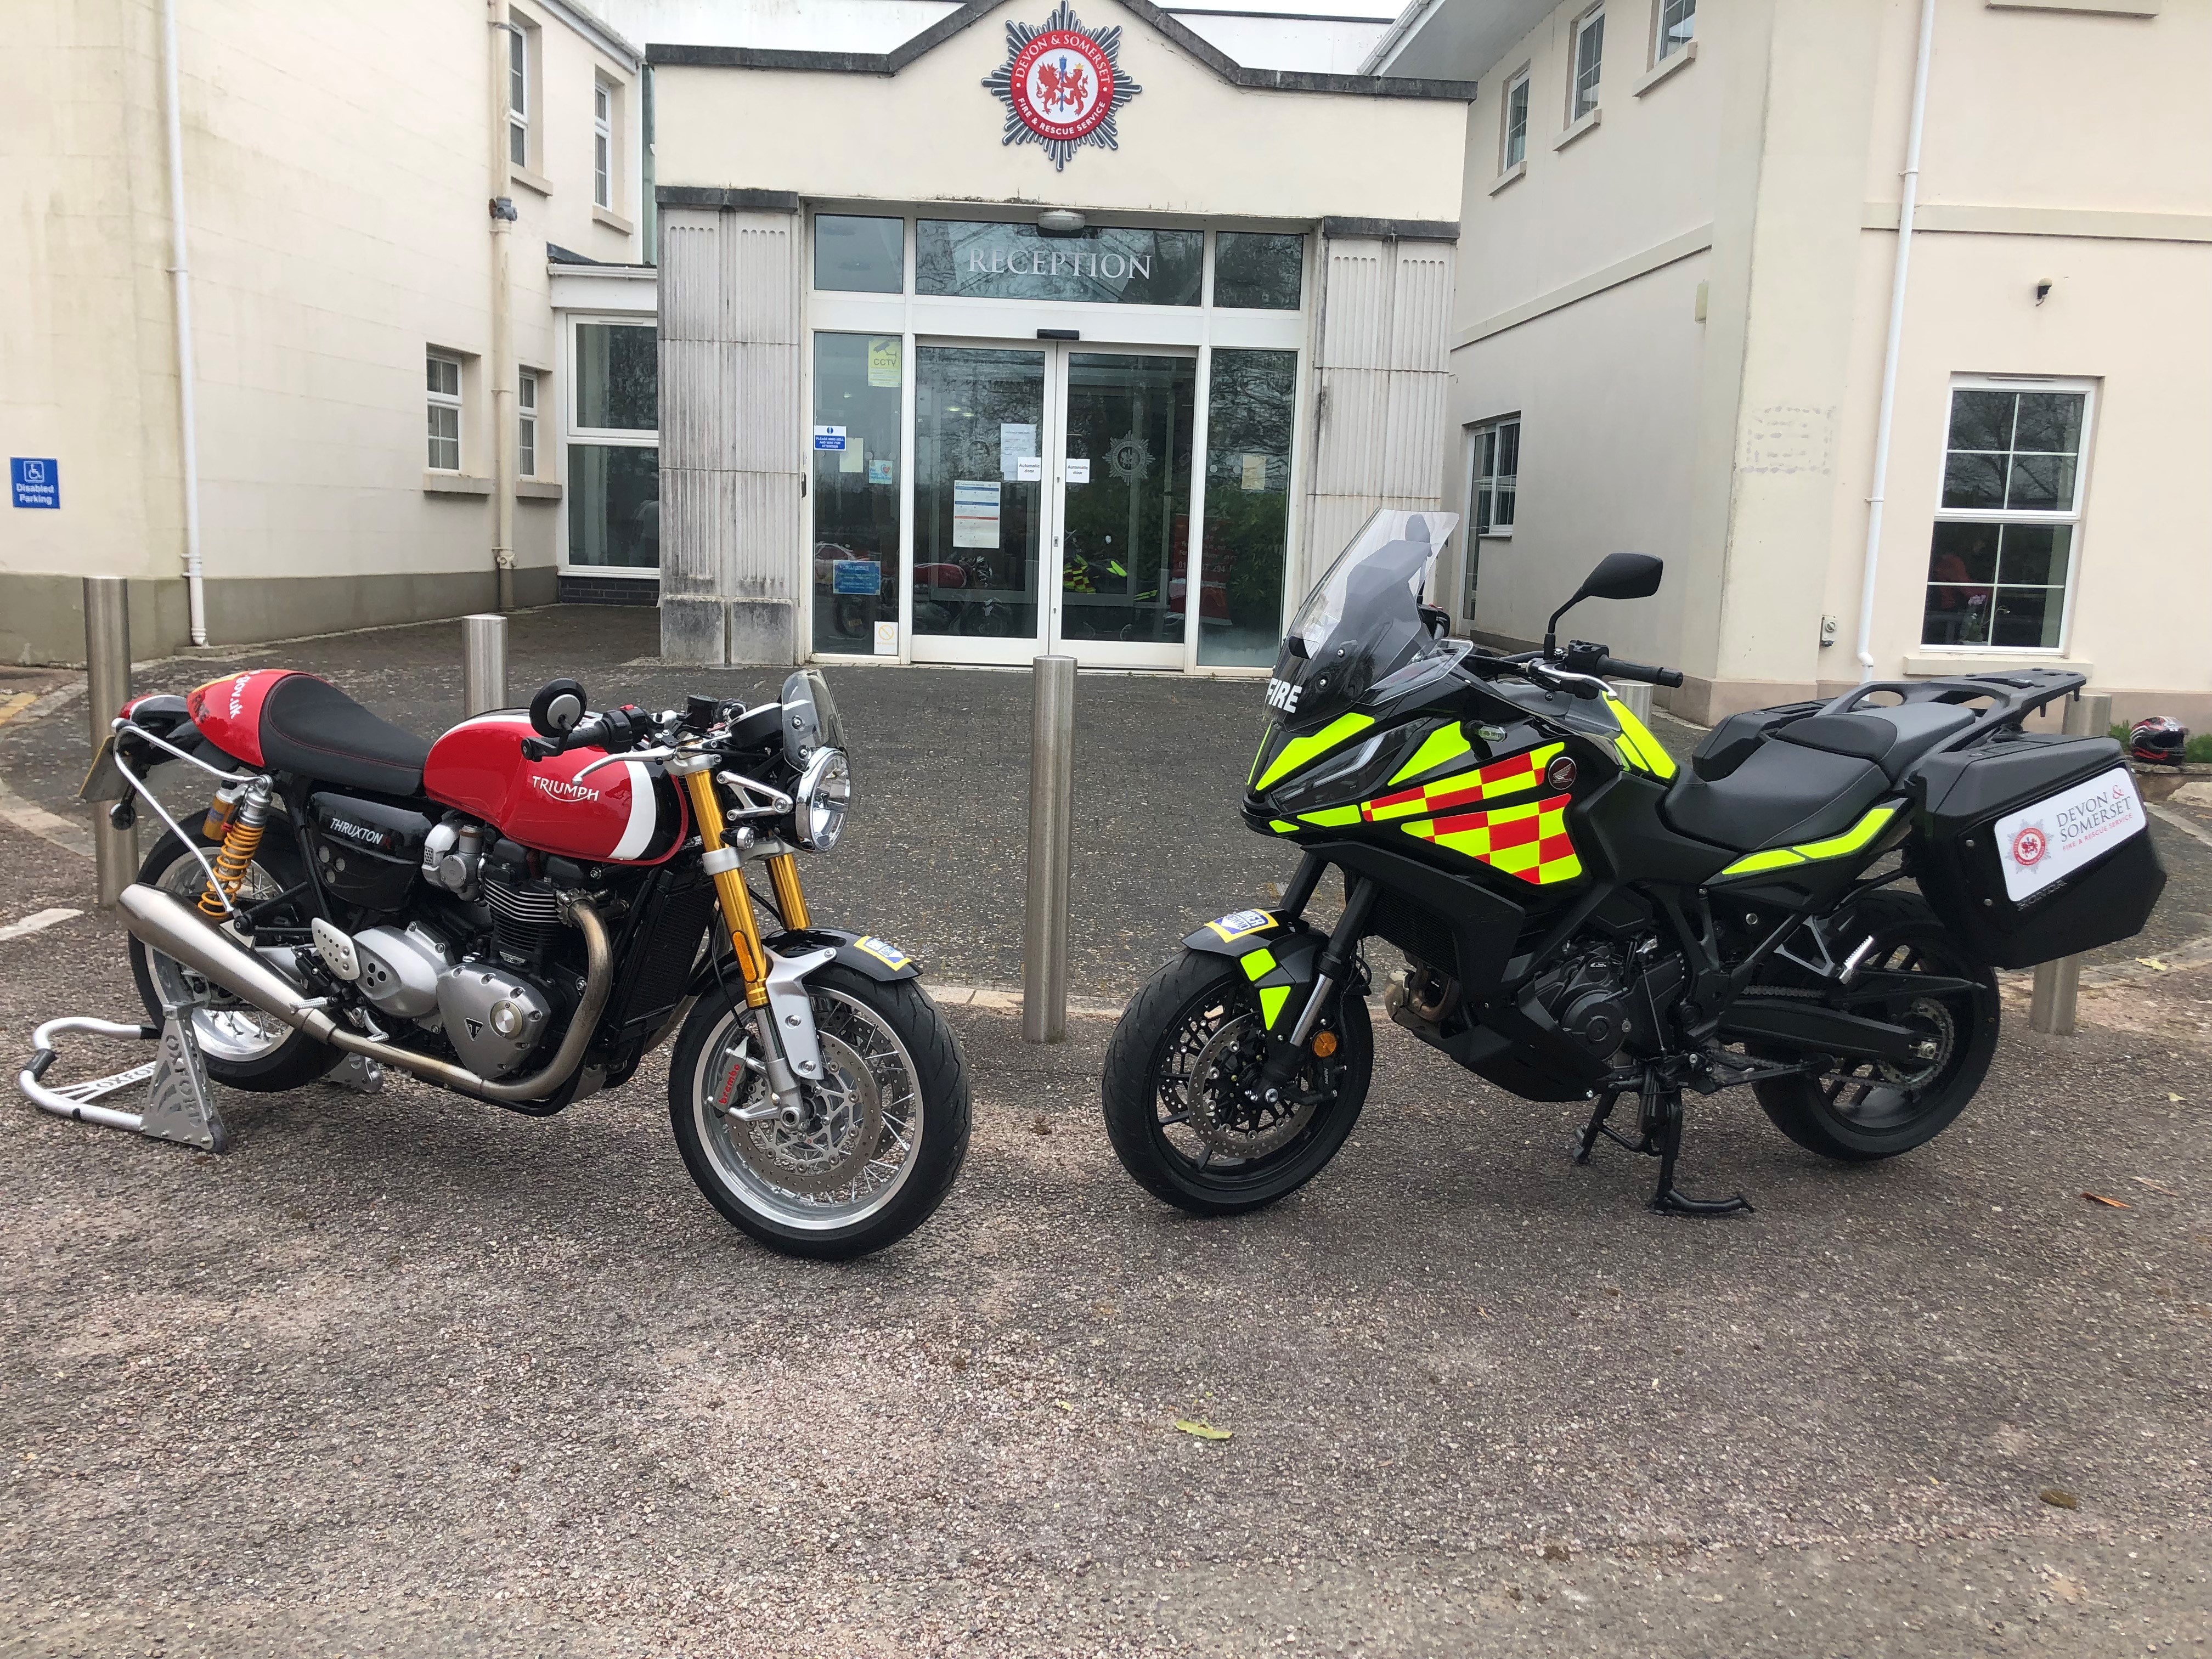 Two motorcycles parked outside fire service headquarters